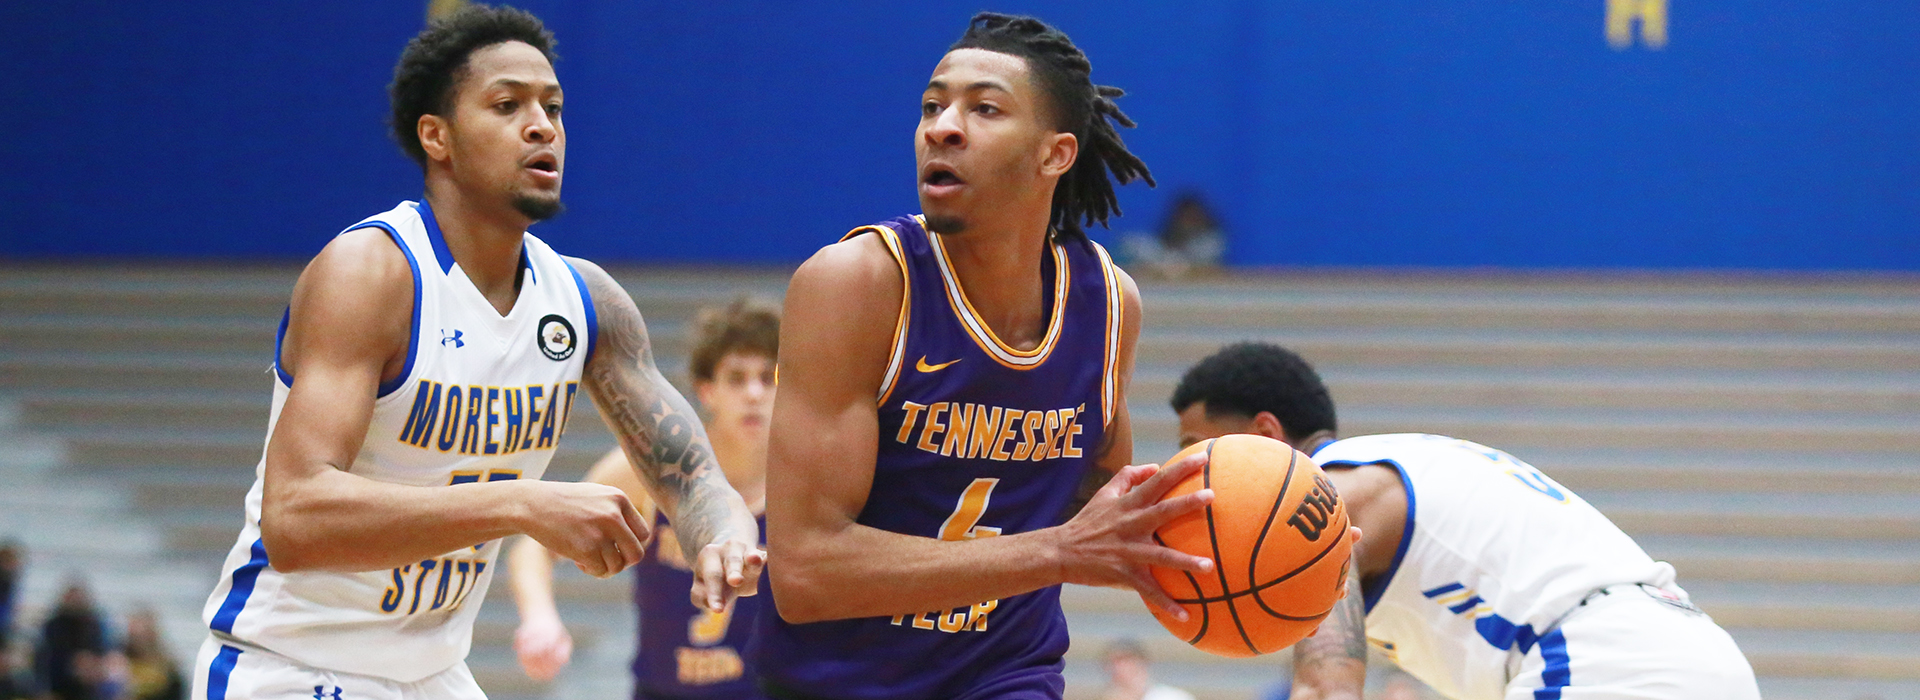 Golden Eagle men push Morehead to limit in road loss